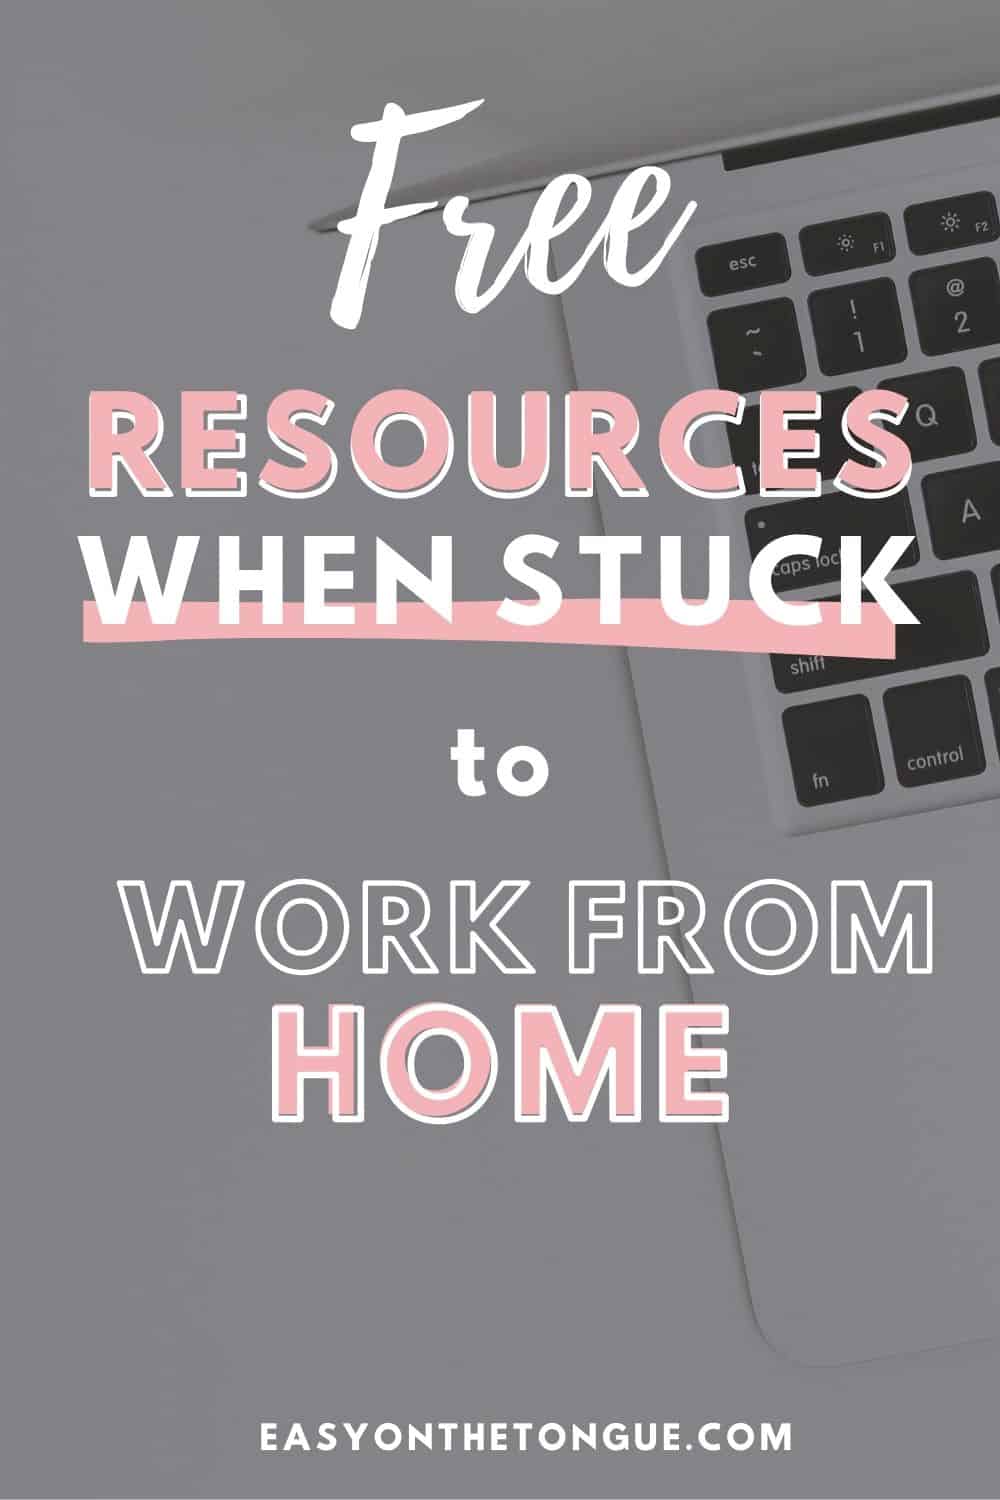 Free resources when stuck to work from home Free Resources when stuck to Work from Home